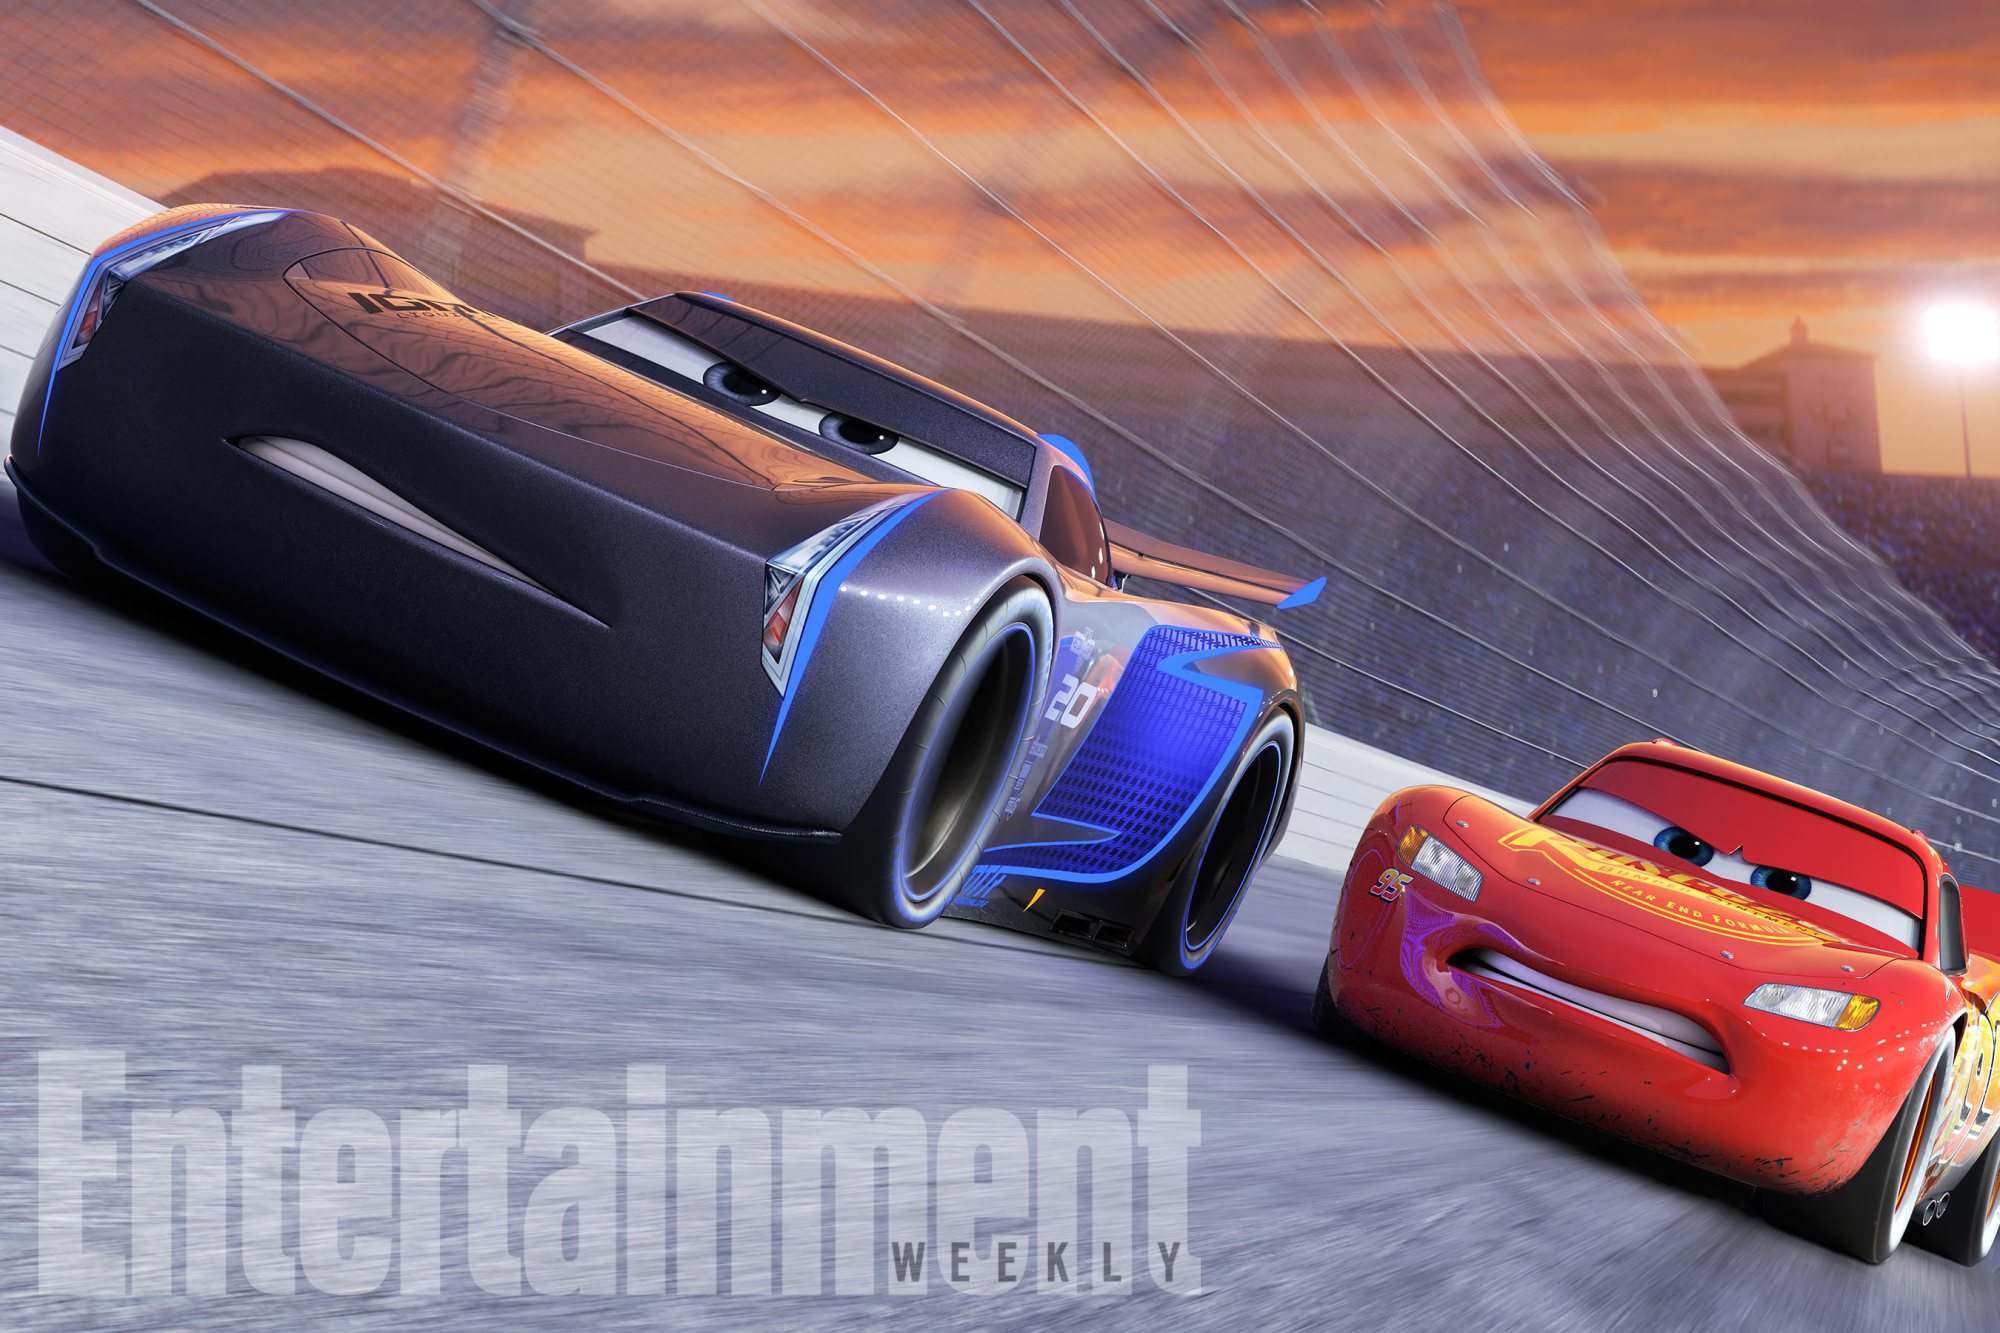 CARS 3NEXT-GEN TAKES THE LEAD Ã³ Jackson Storm (voice of Armie Hammer), a frontrunner in the next generation of racers, posts speeds that even Lightning McQueen (voice of Owen Wilson) hasnÃ­t seen.  "Cars 3" is in theaters June 16, 2017. Â©2016 DisneyÃ¯Pixar. All Rights Reserved.